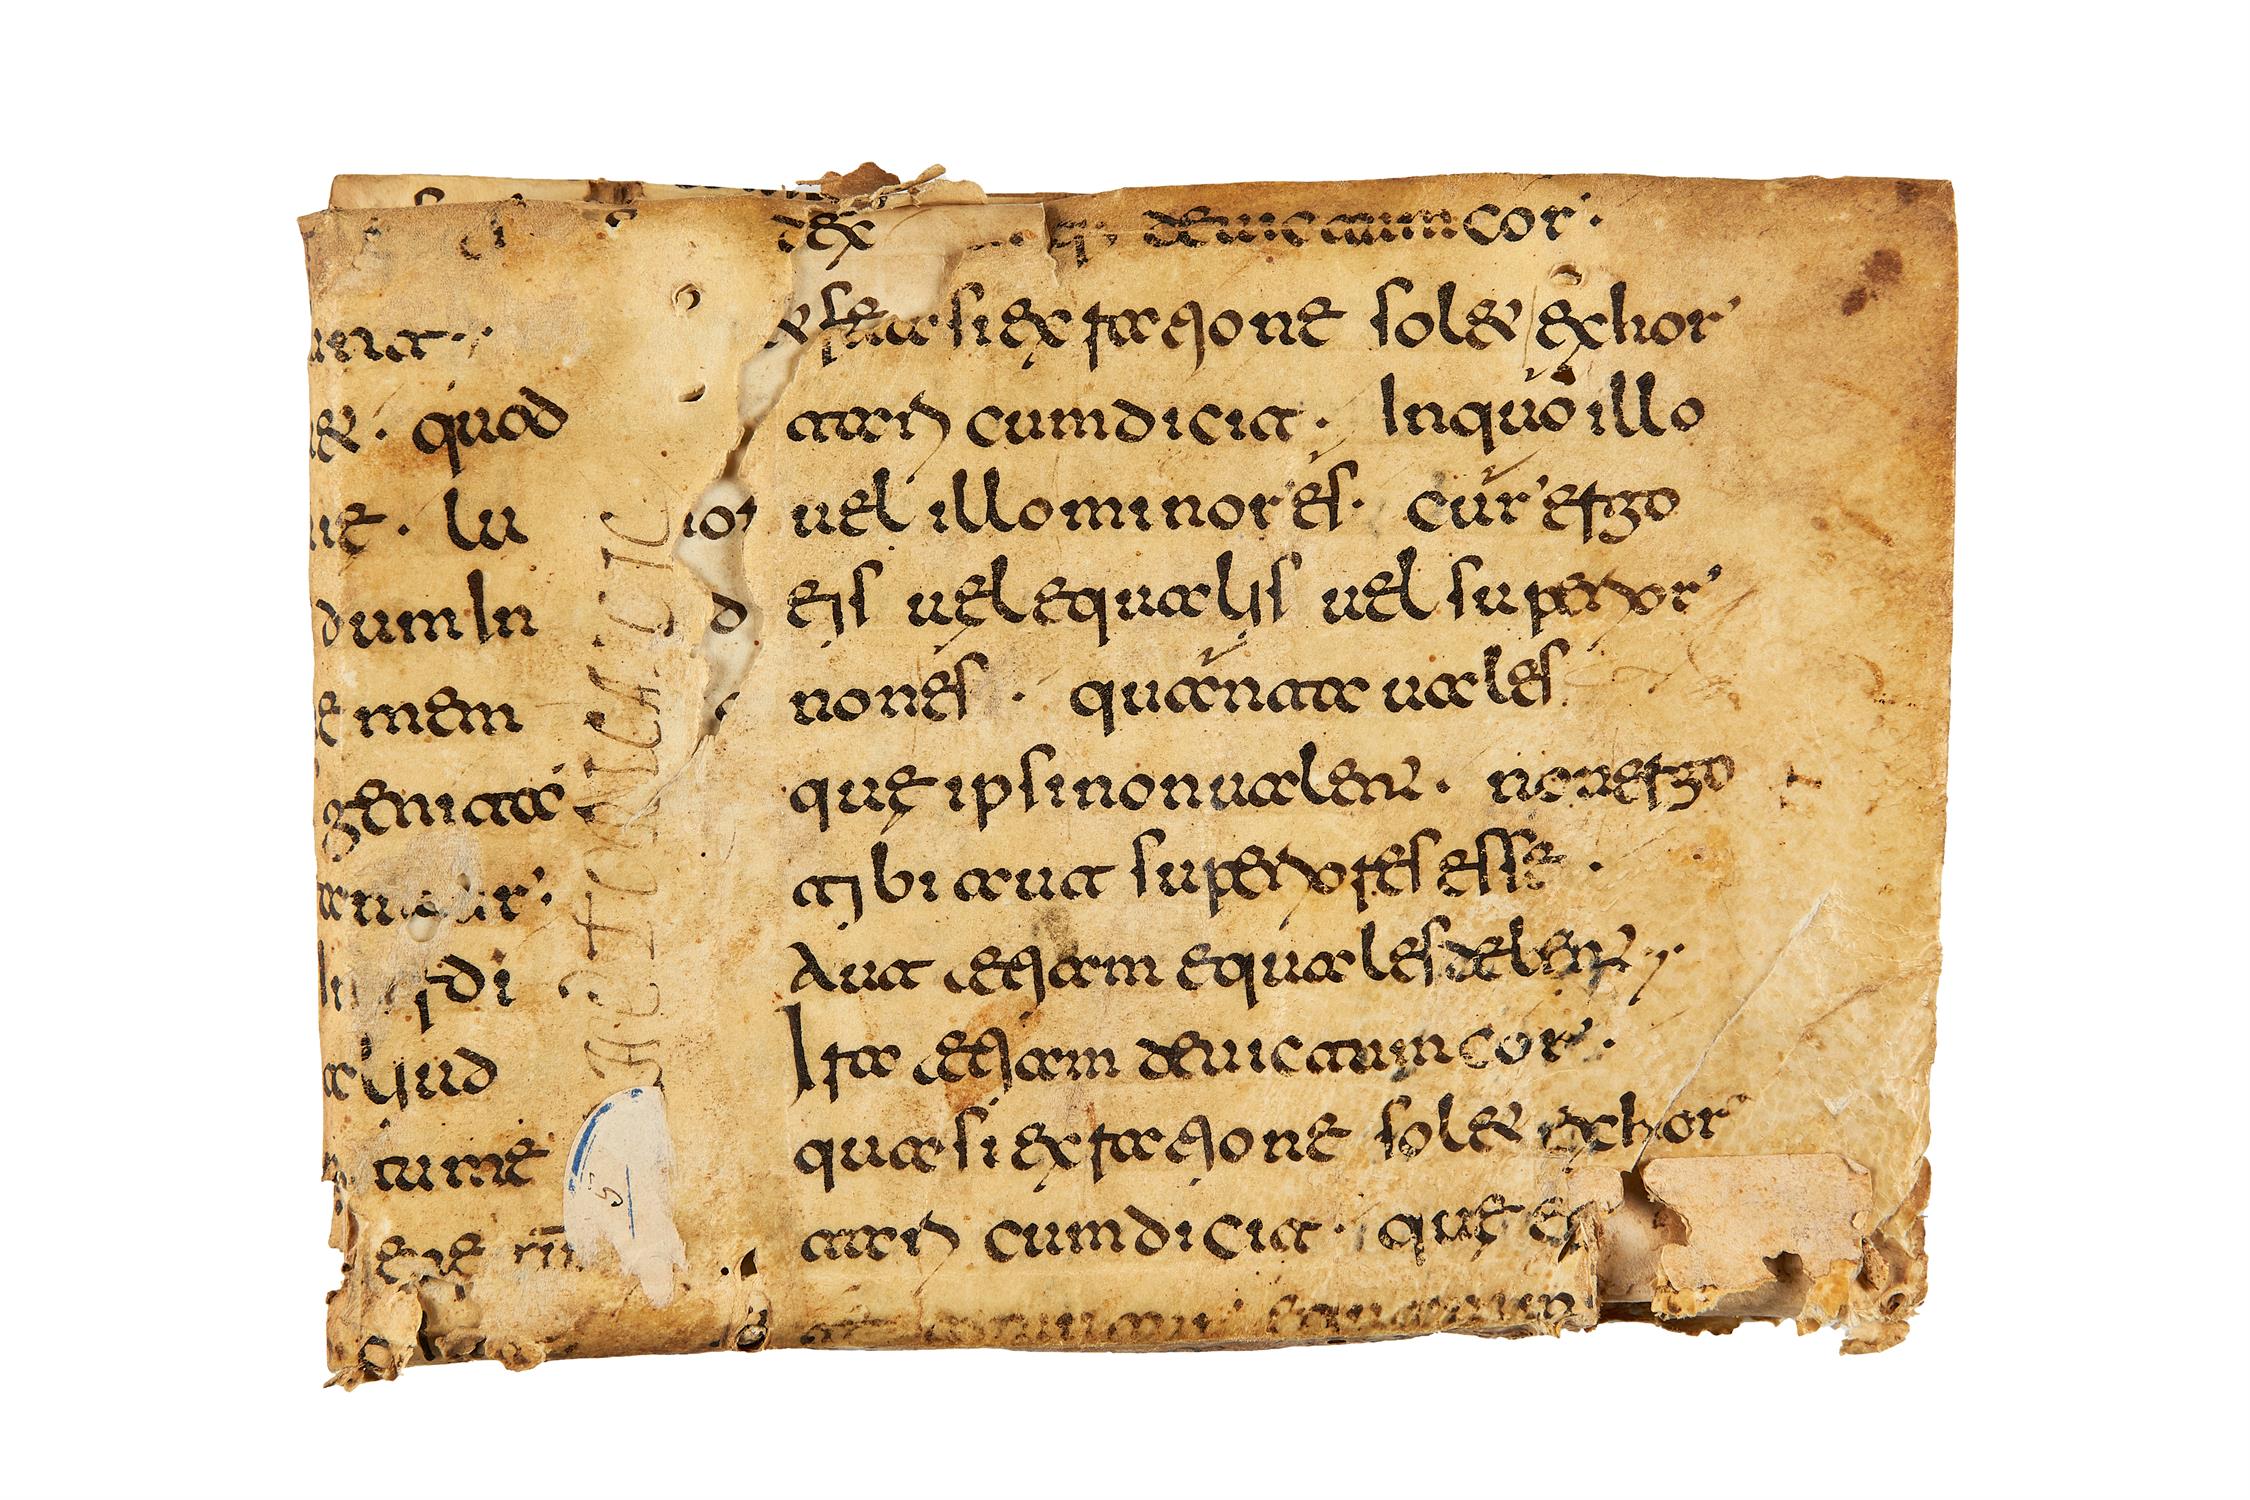 Gregory the Great, Moralia in Job, in Latin, manuscript on parchment [Southern Italy, 11th century] - Image 2 of 2